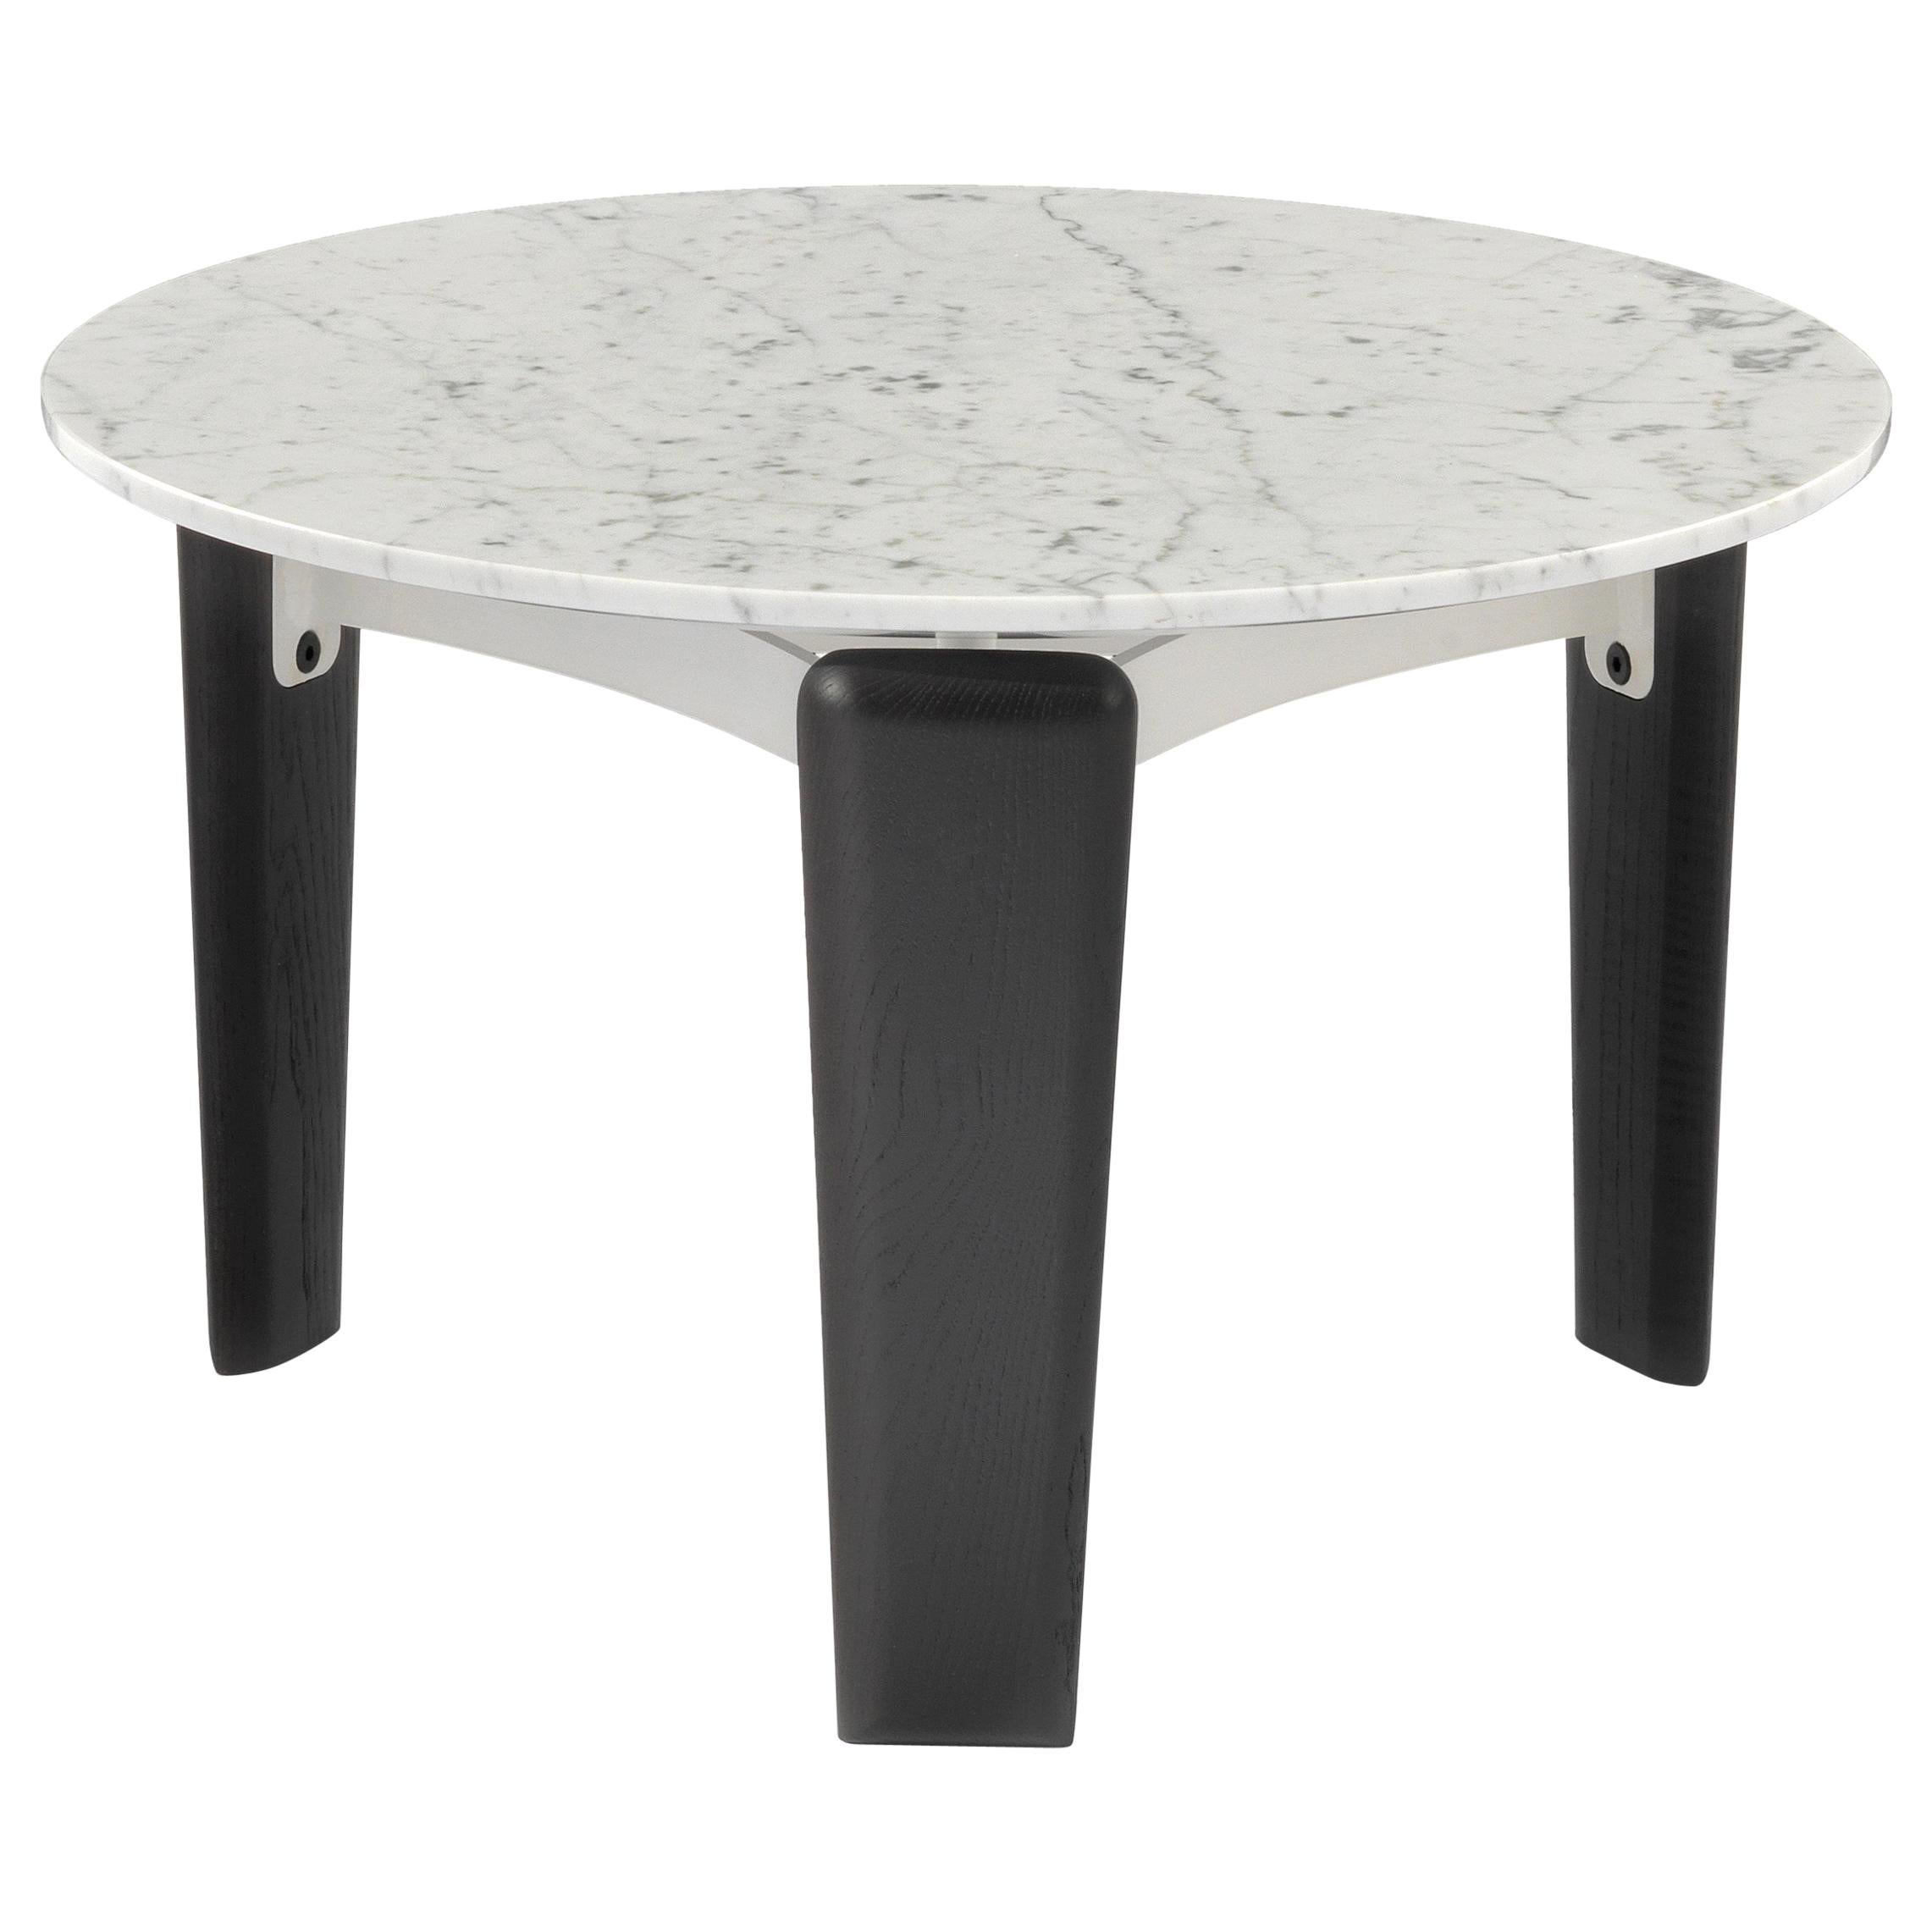 Arflex Tablet 50cm Small Low Table in White Marble by Claesson Koivisto Rune